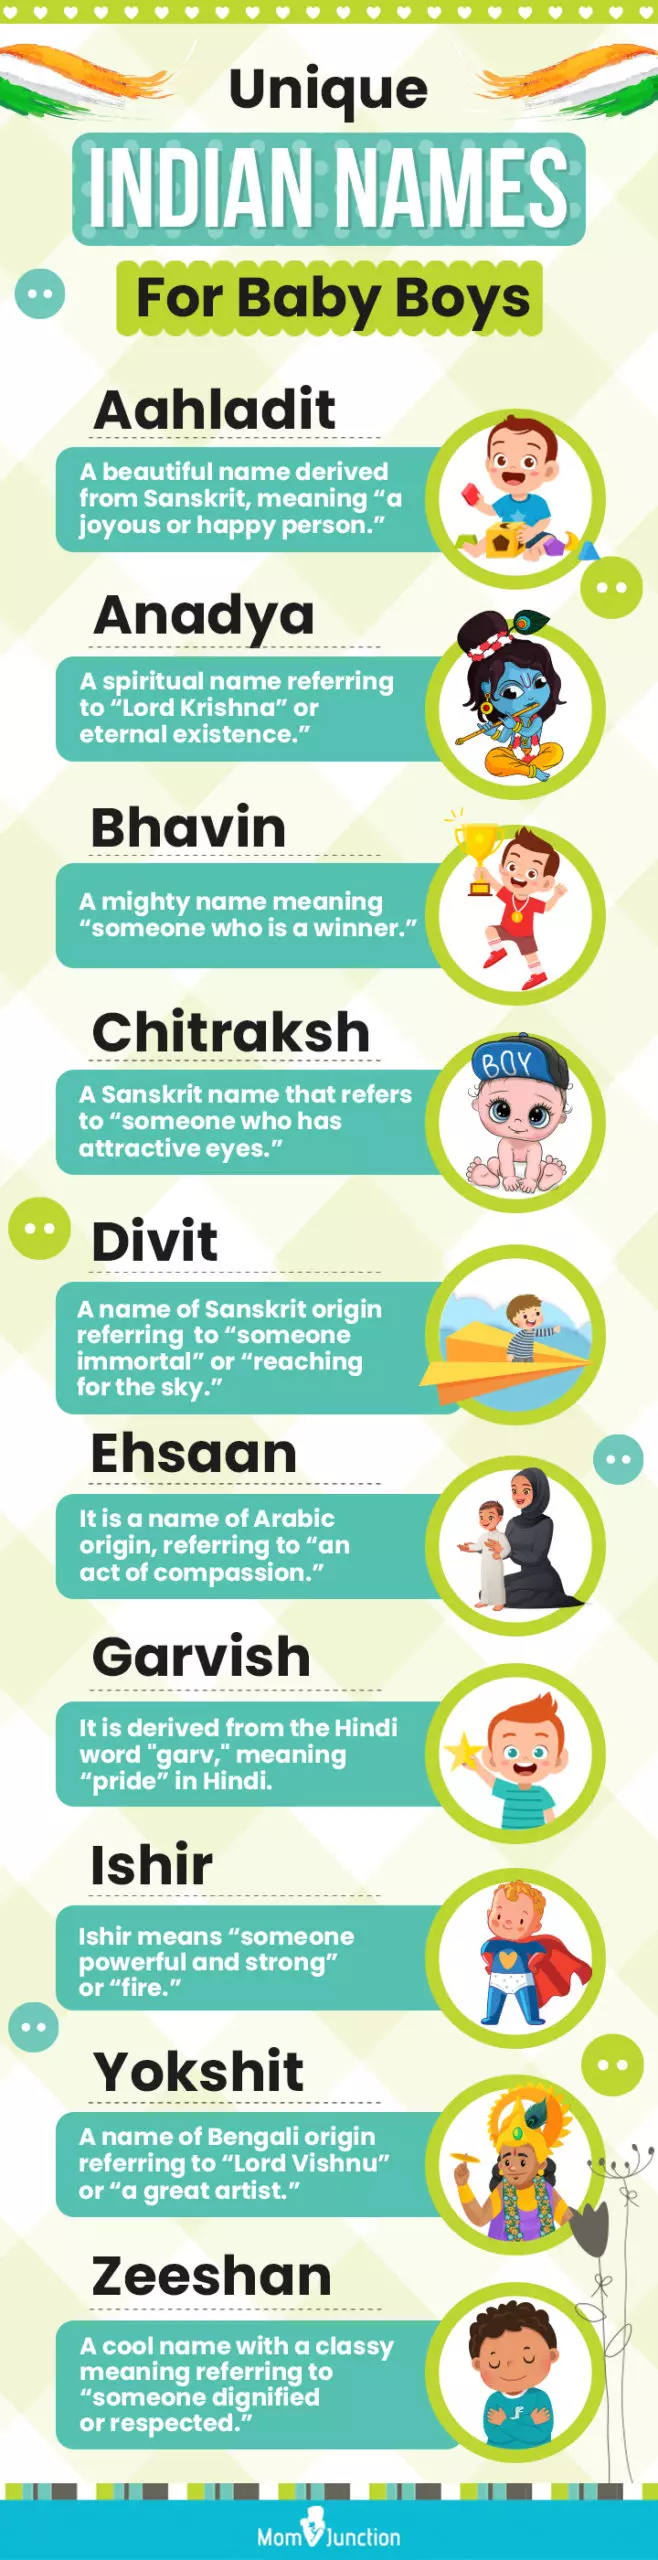 unique indian names for baby boys (infographic)